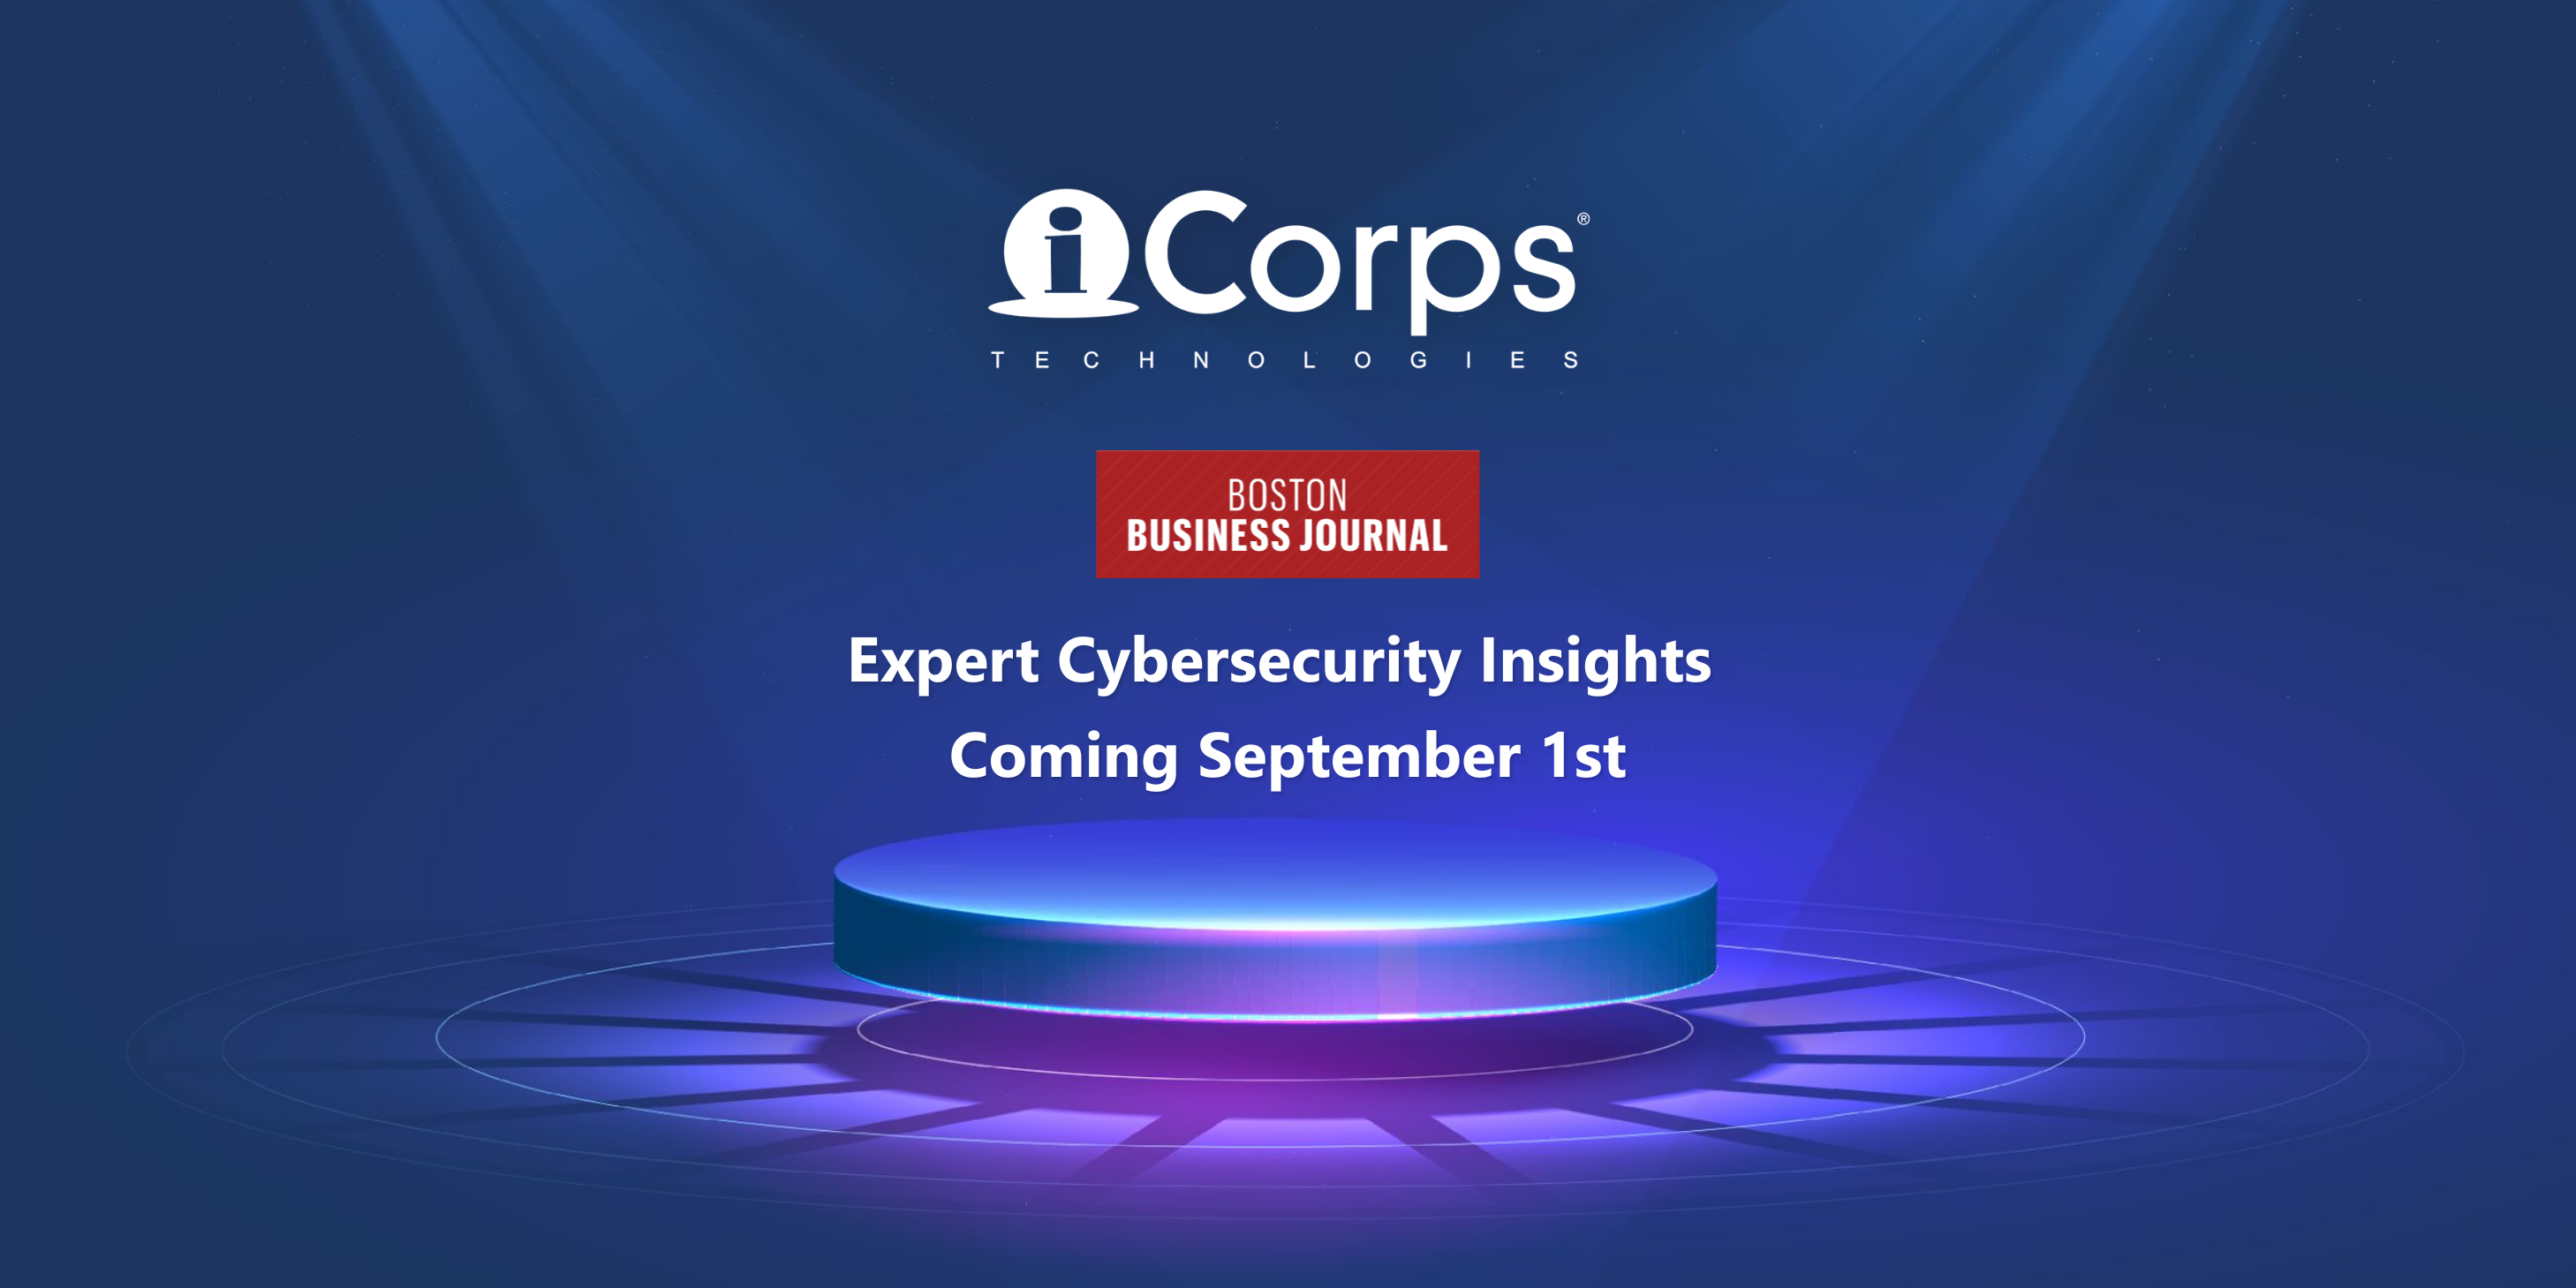 iCorps' Cybersecurity Insights Coming Soon to the Boston Business Journal